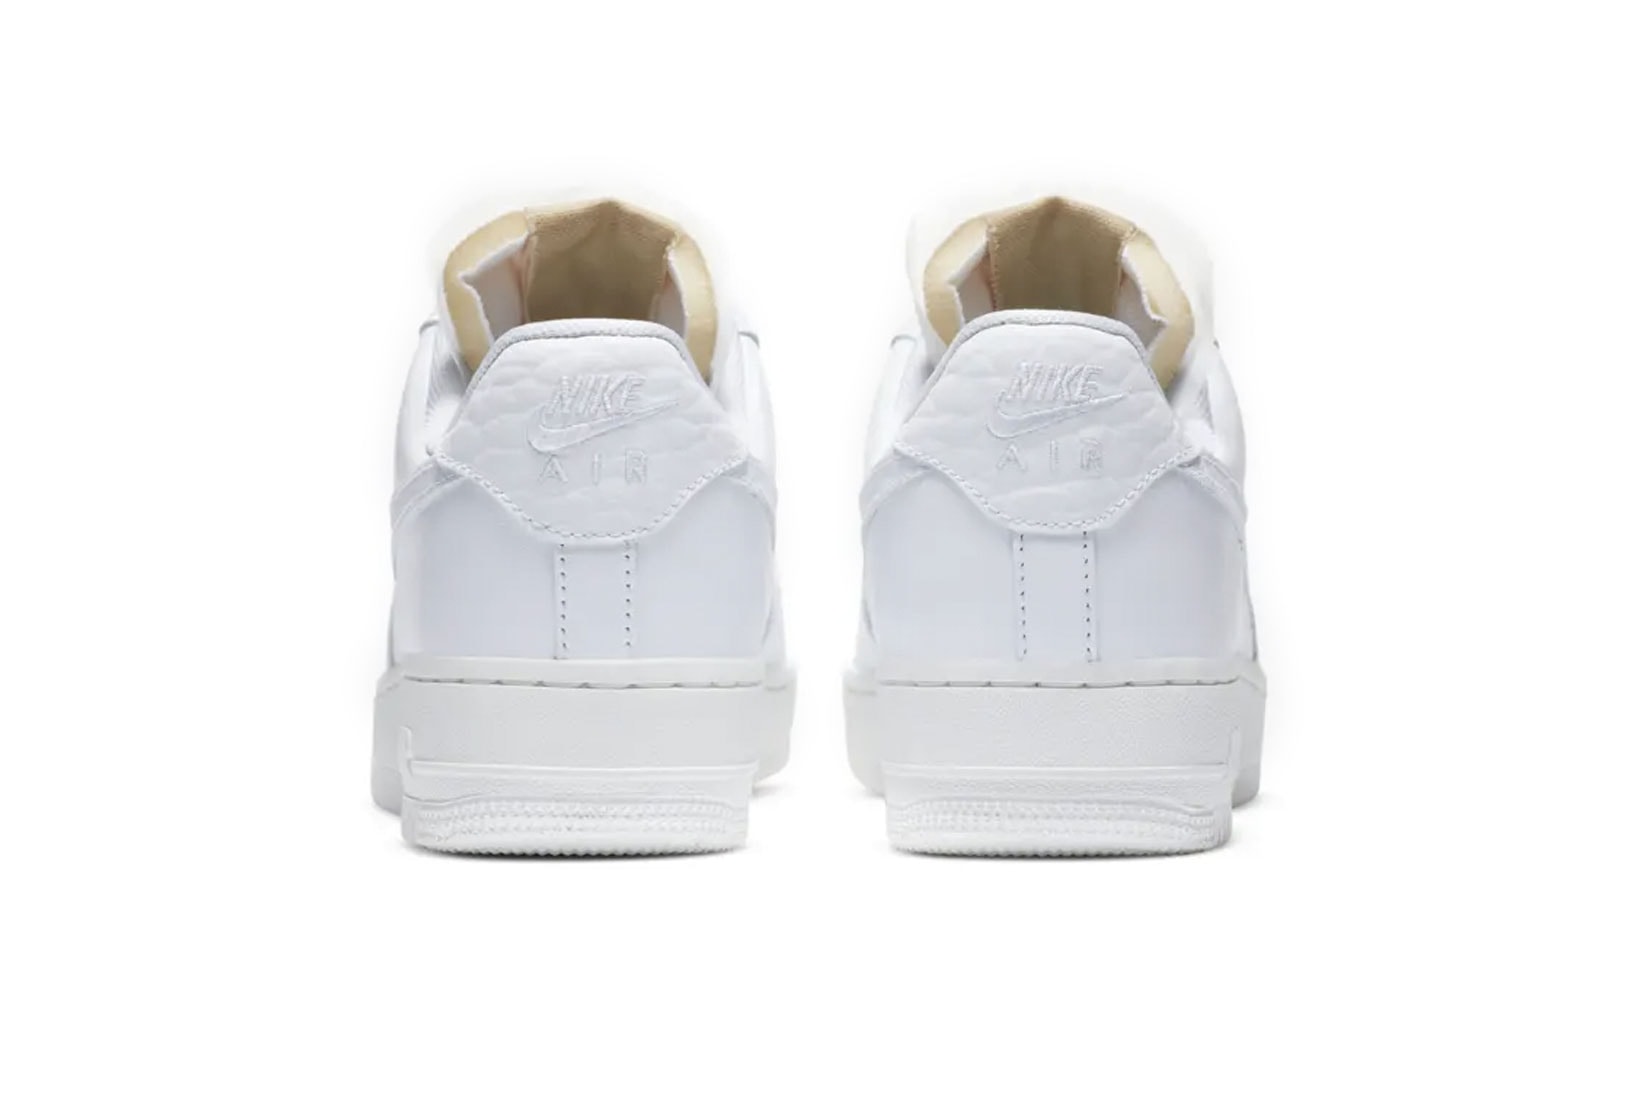 Nike Air Force 1 '07 LX White Lace AF1 Women's Sneakers Release Info